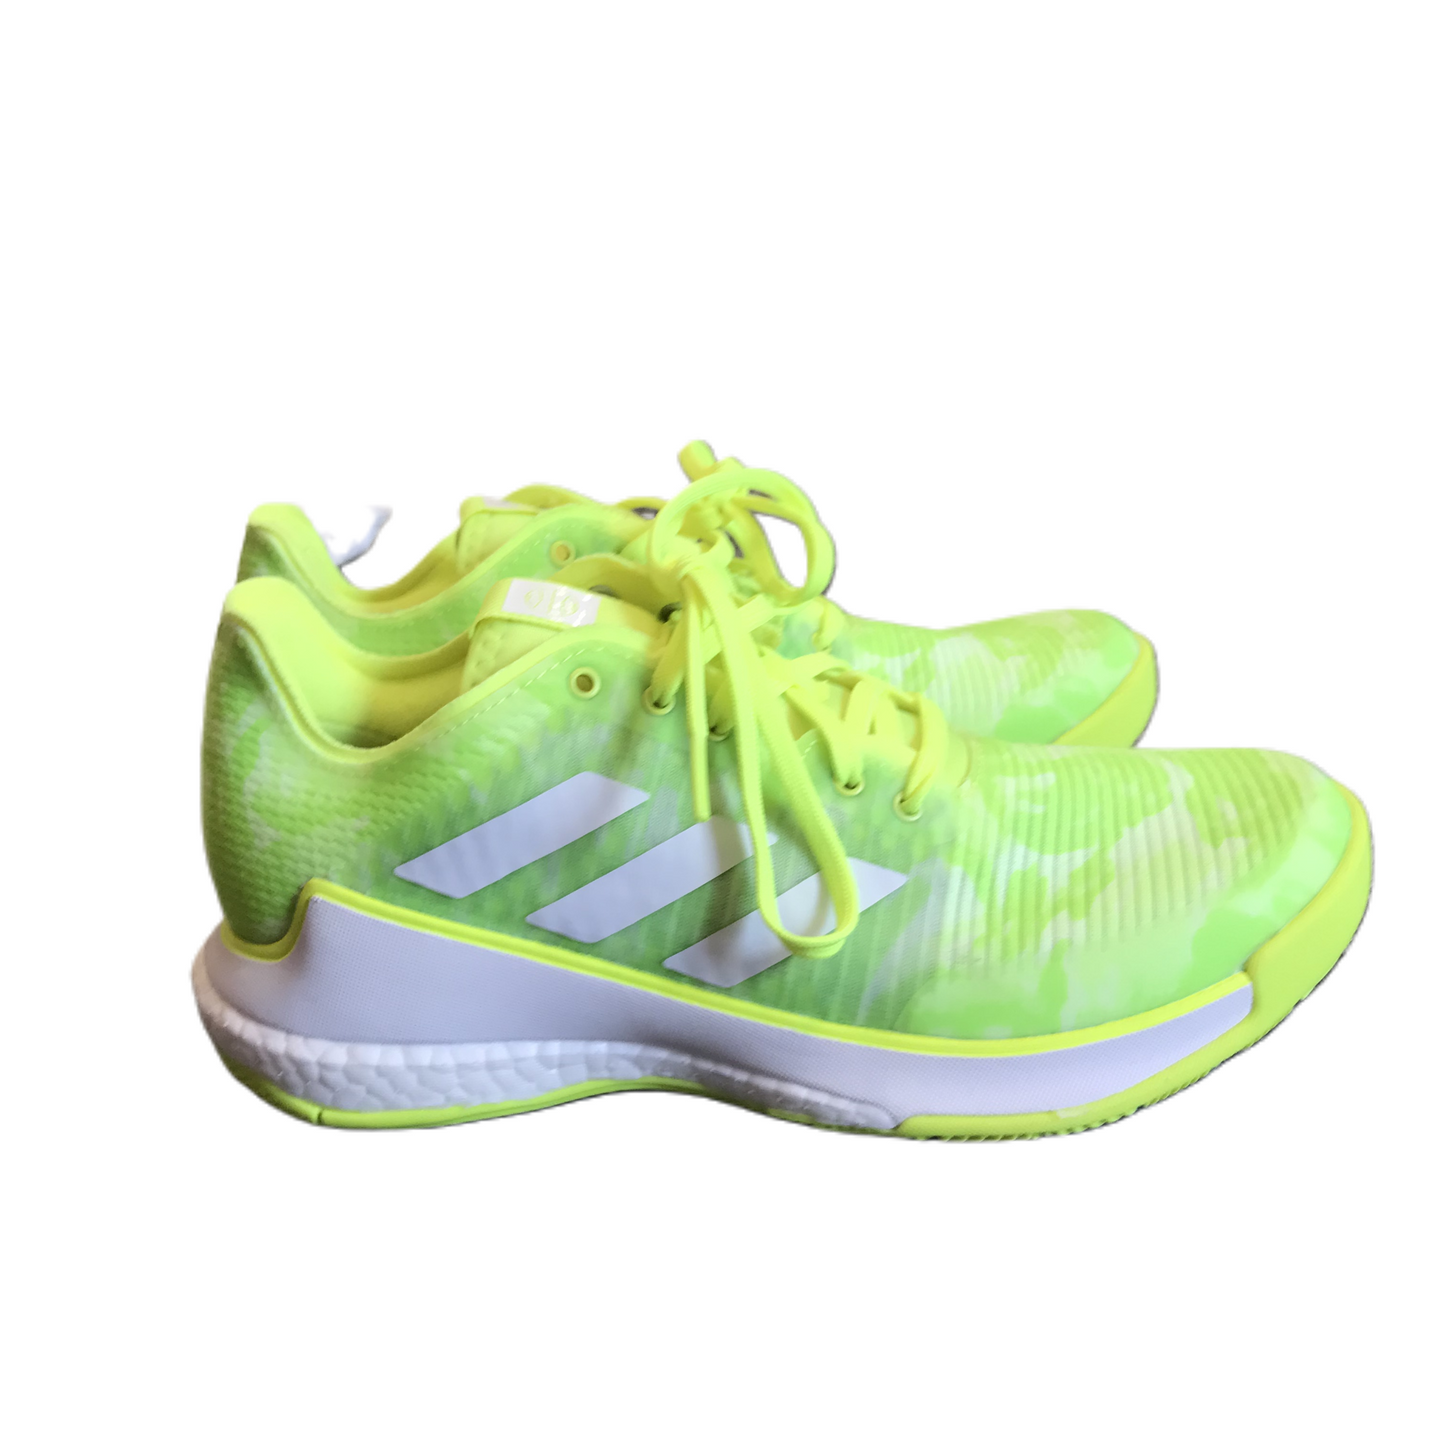 Green & White Shoes Athletic By Adidas, Size: 8